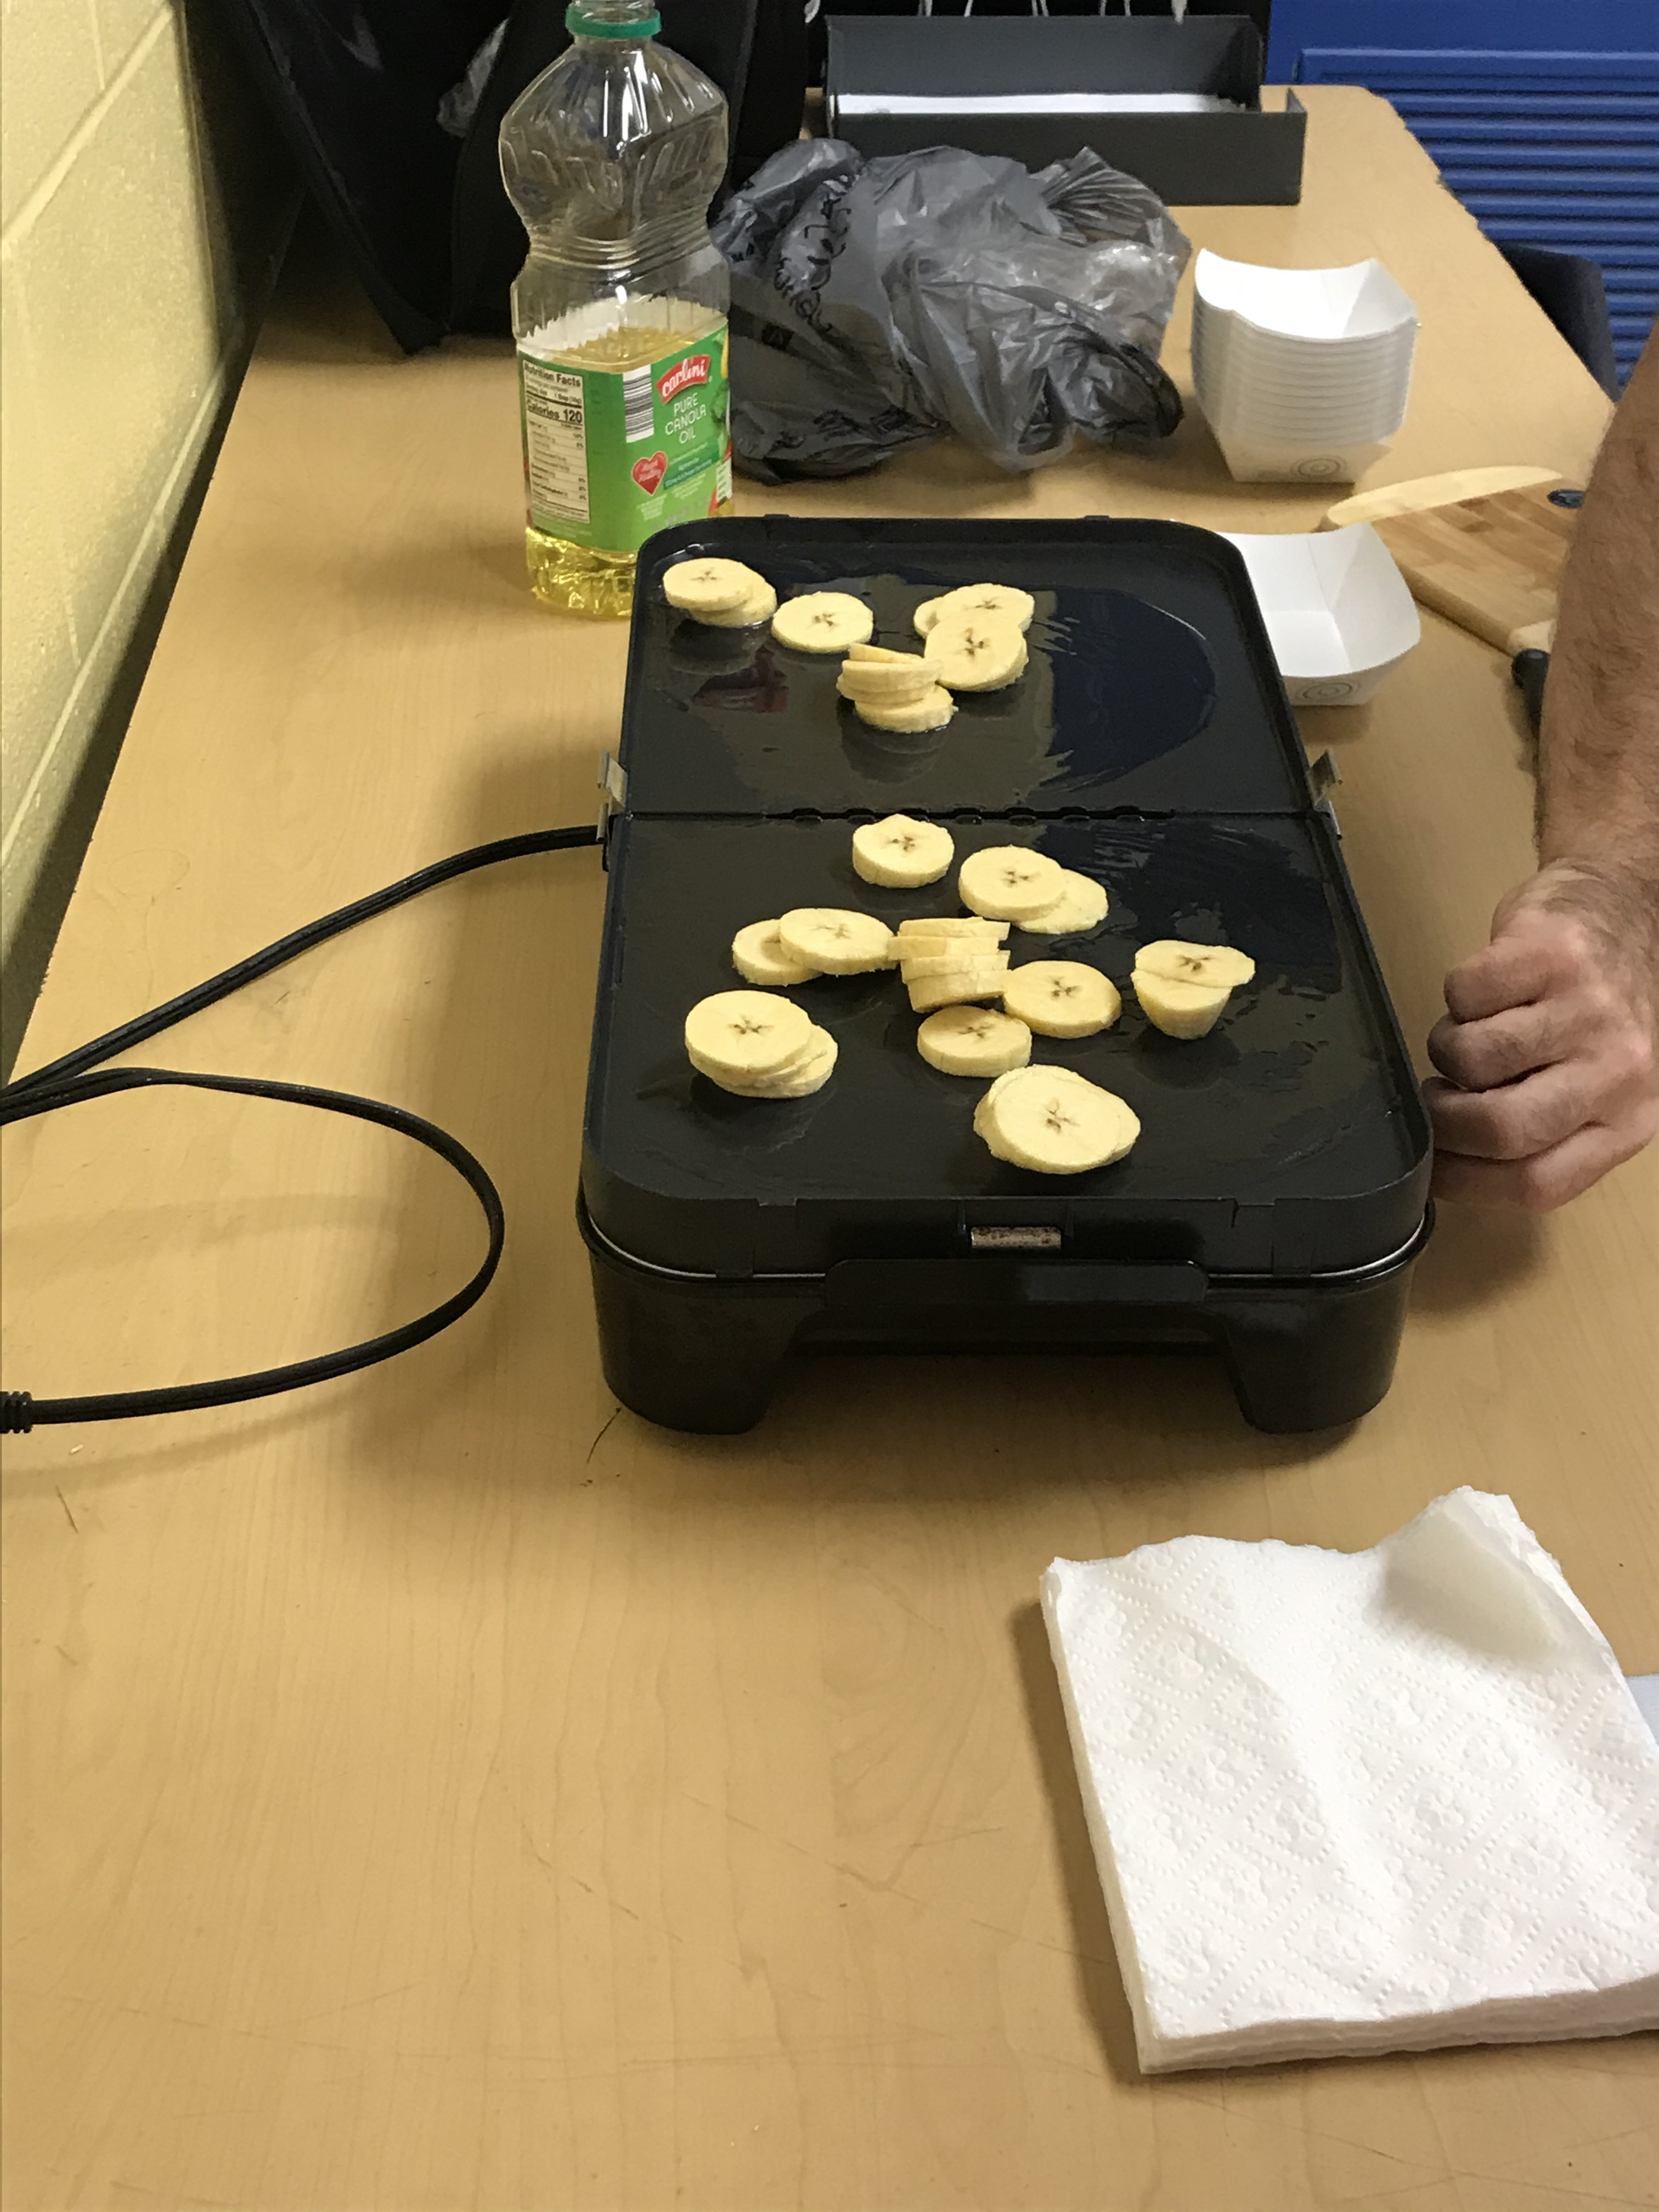 SeÃ±or profe Madrigal cooking the spanish class plantains.